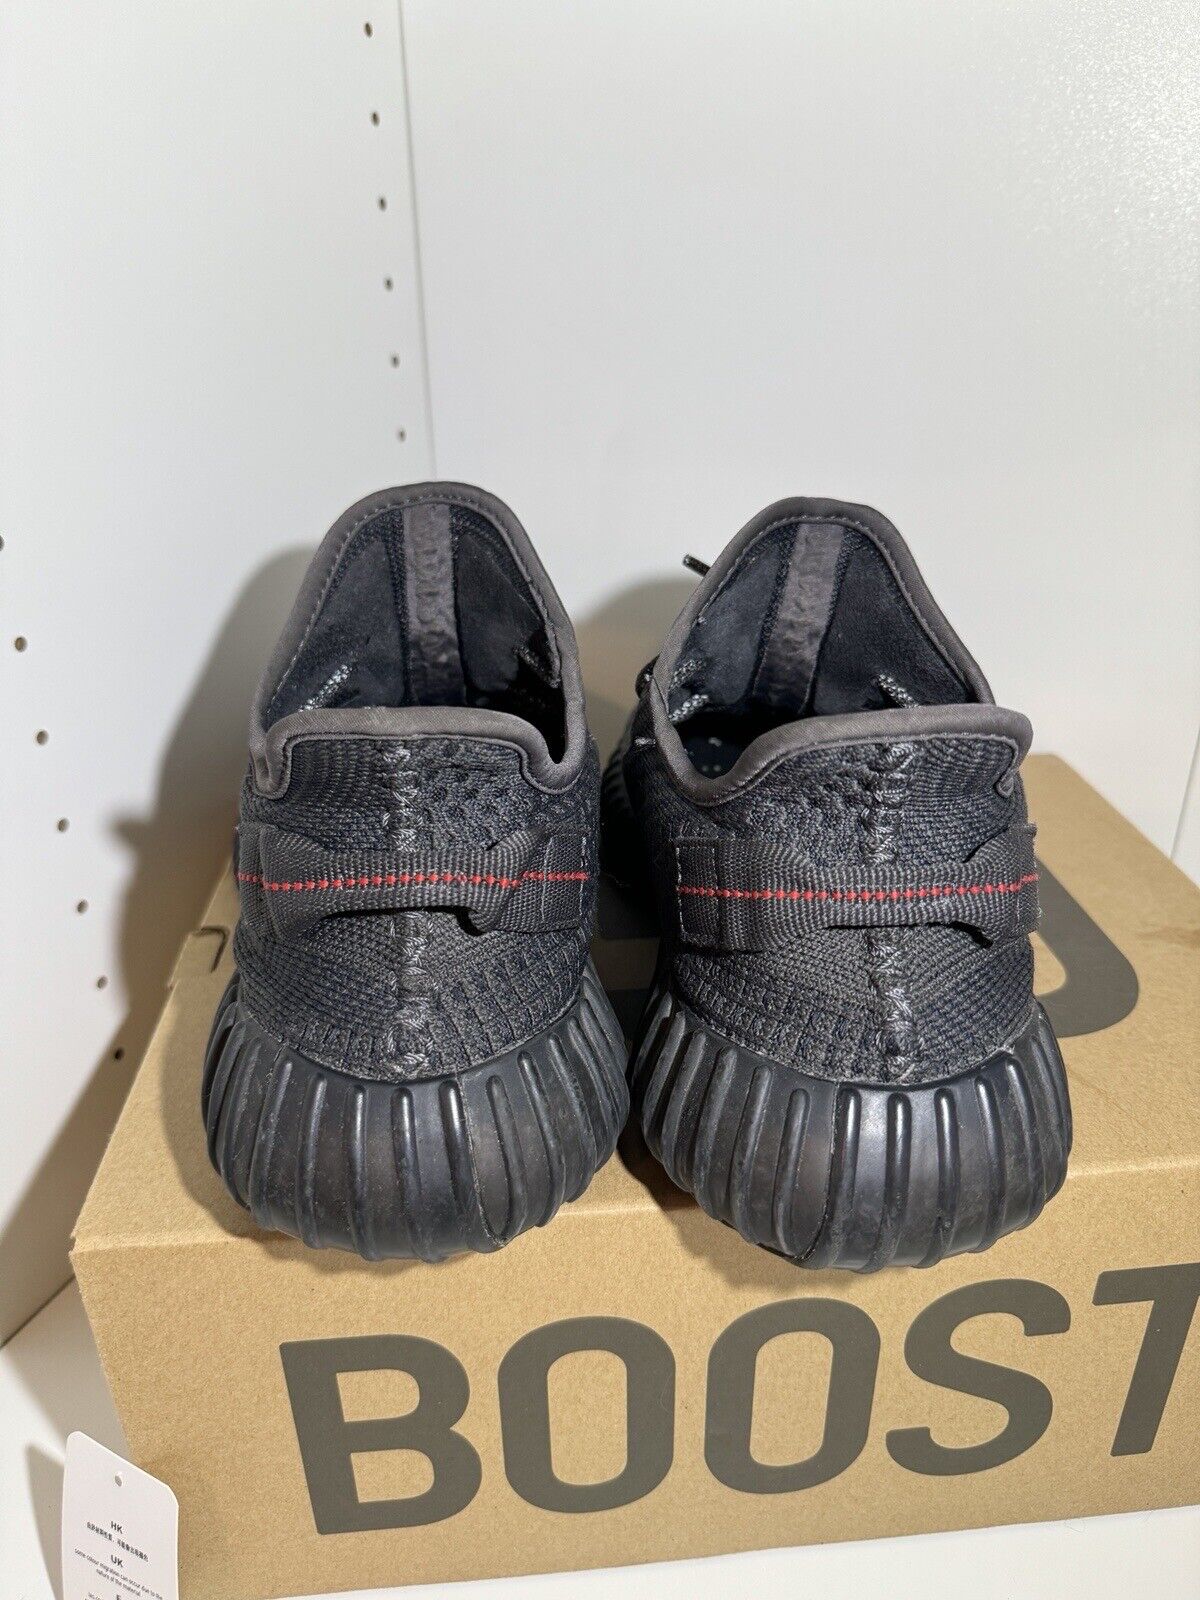 Adidas Yeezy Boost 350 V2 Static Black Non-Reflective Mens Size 5.5 (PRE  OWNED)